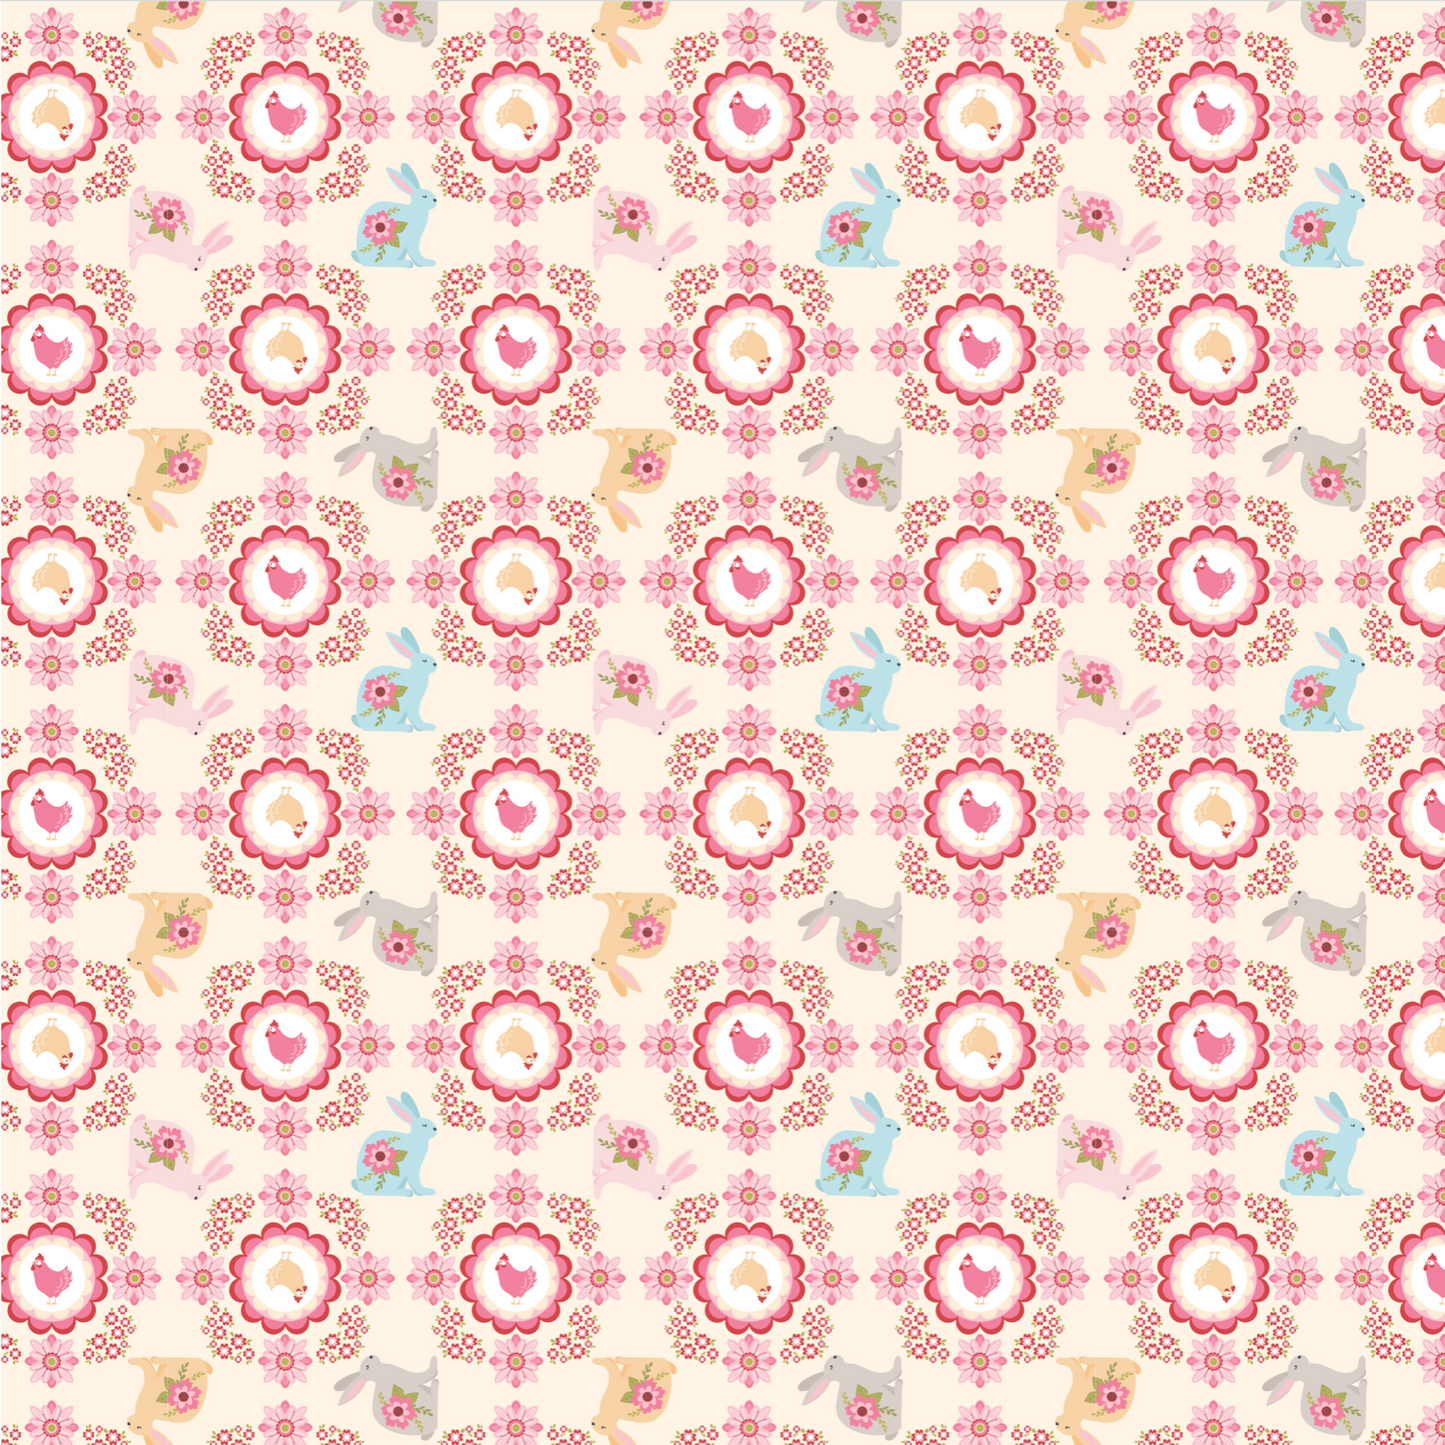 Poppies Patchwork Club, Flopsy and Mopsy Cream, PP23619, sold by the 1/2 yard